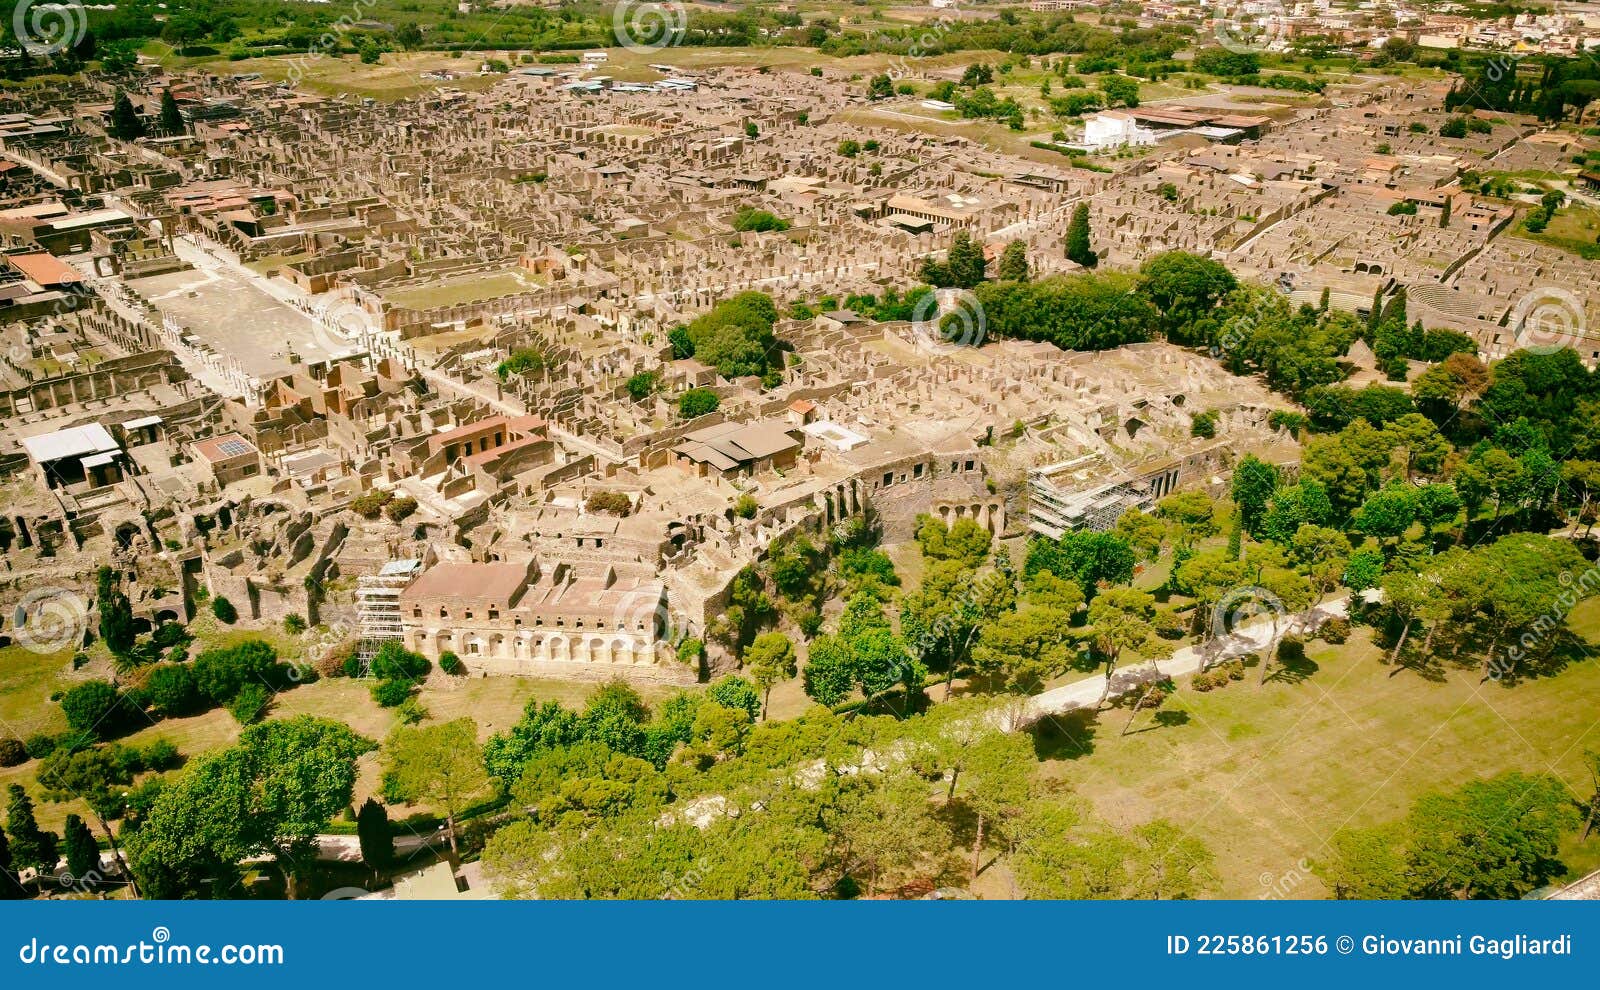 pompei, italy. aerial view of old city from a drone viewpoint in summer season